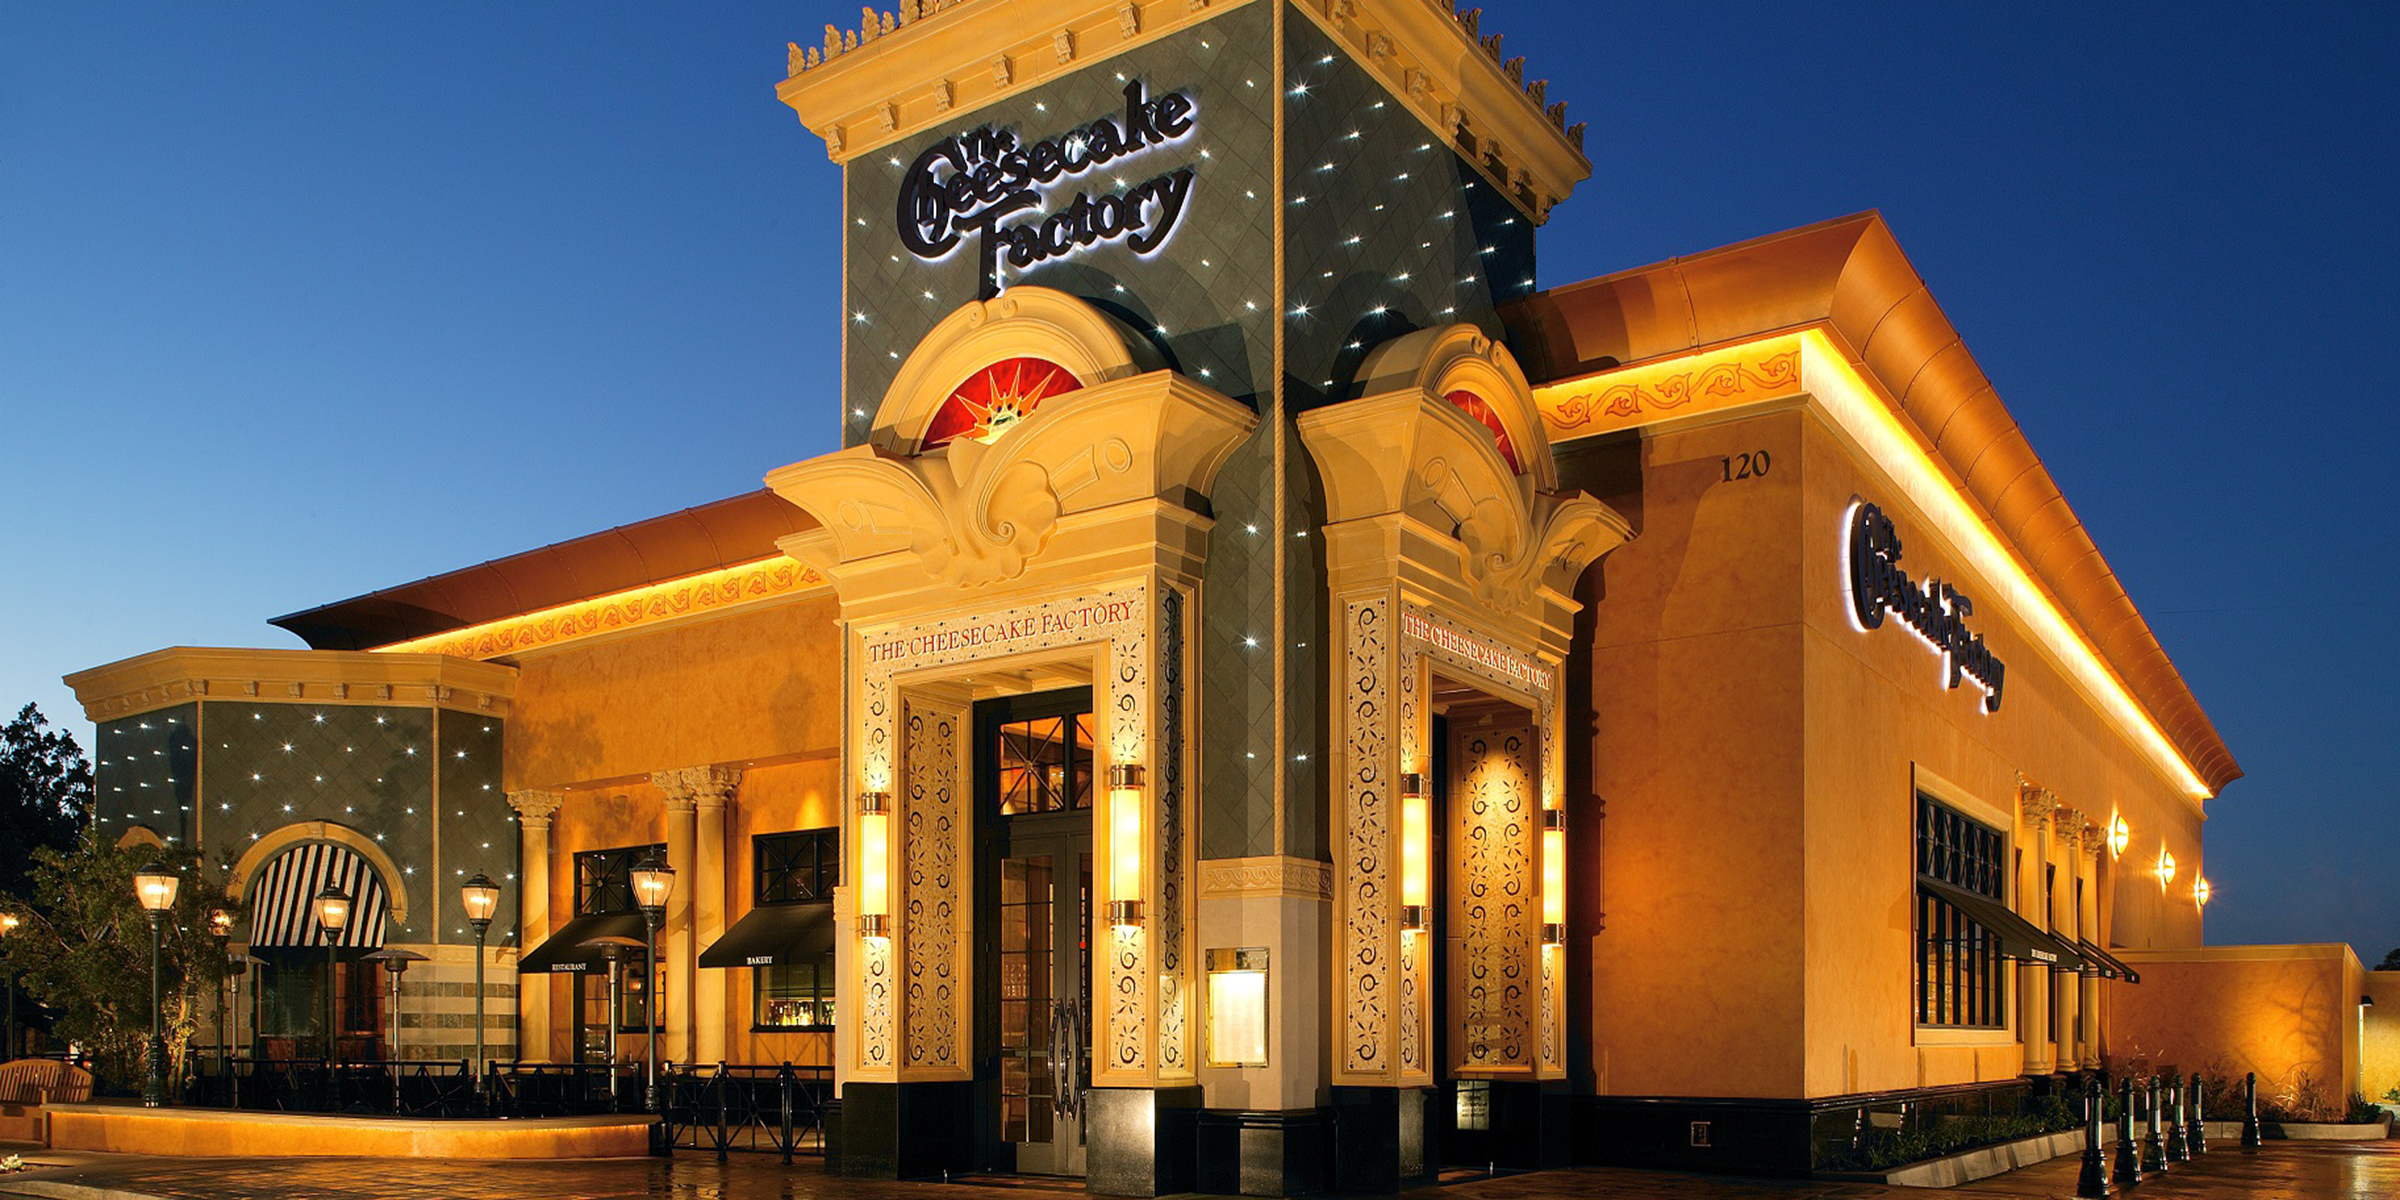 The Cheesecake Factory - $10.00 off when you spend $50.00